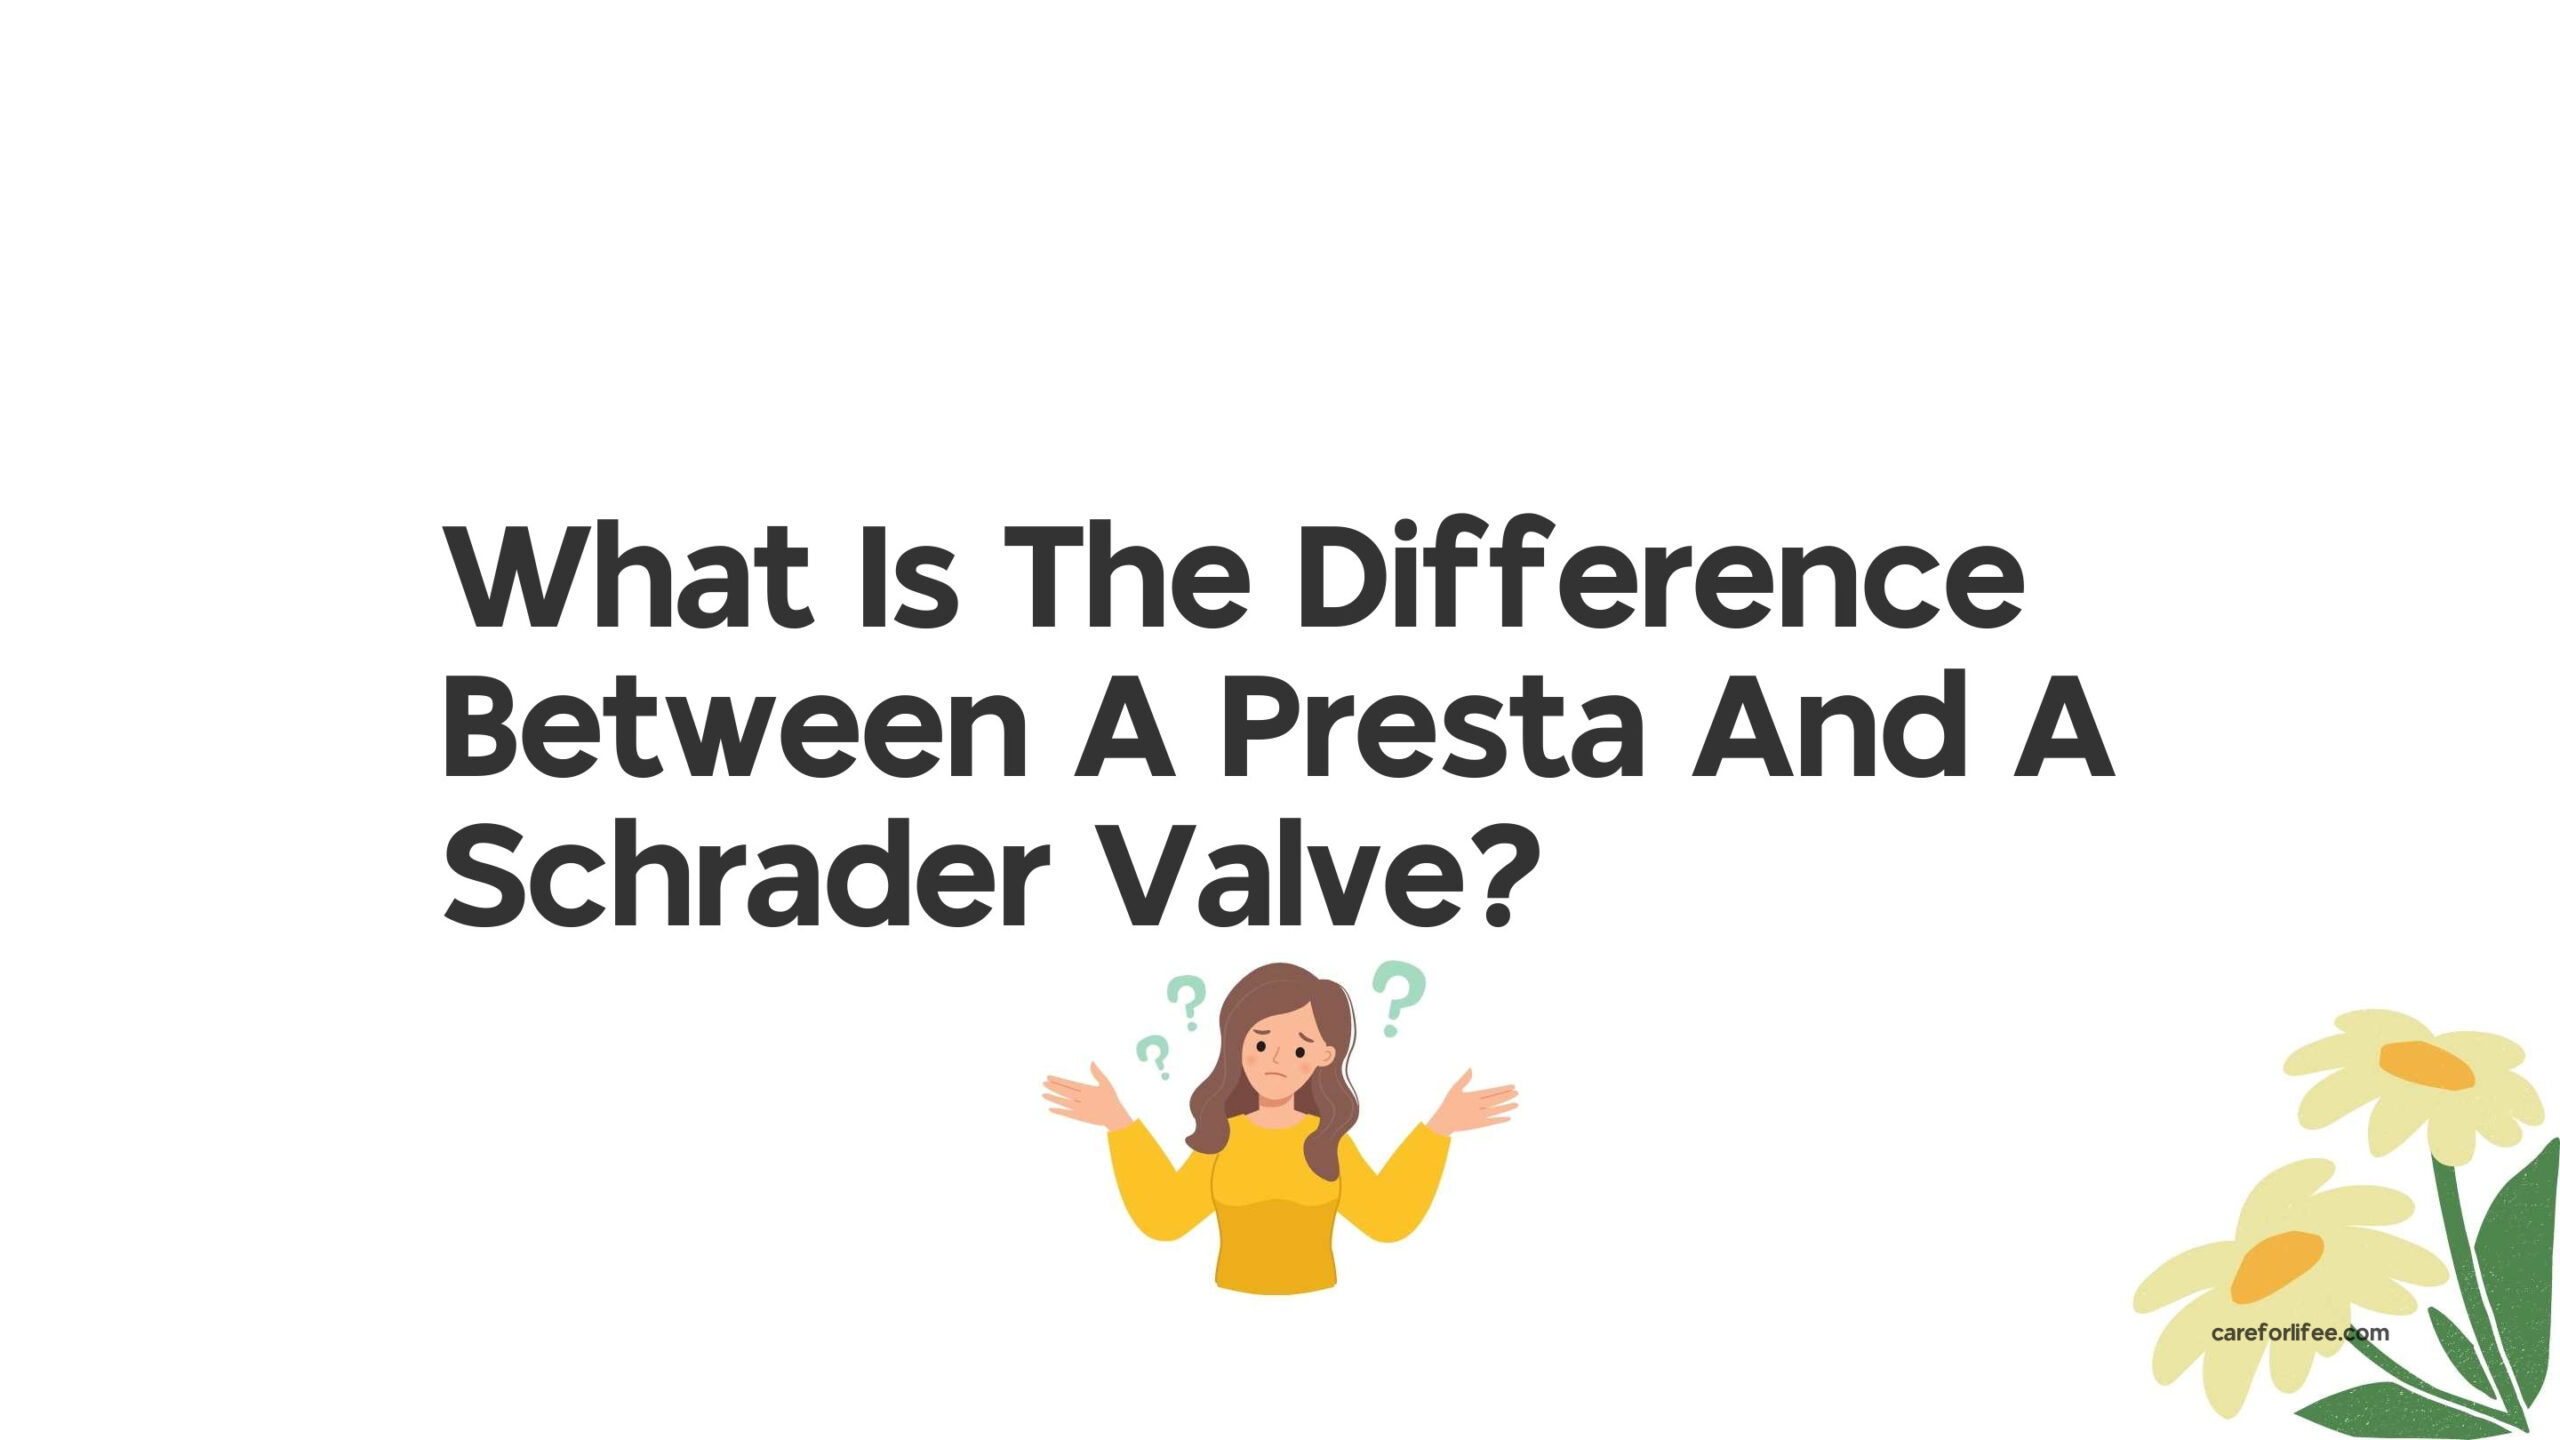 What Is The Difference Between A Presta And A Schrader Valve?